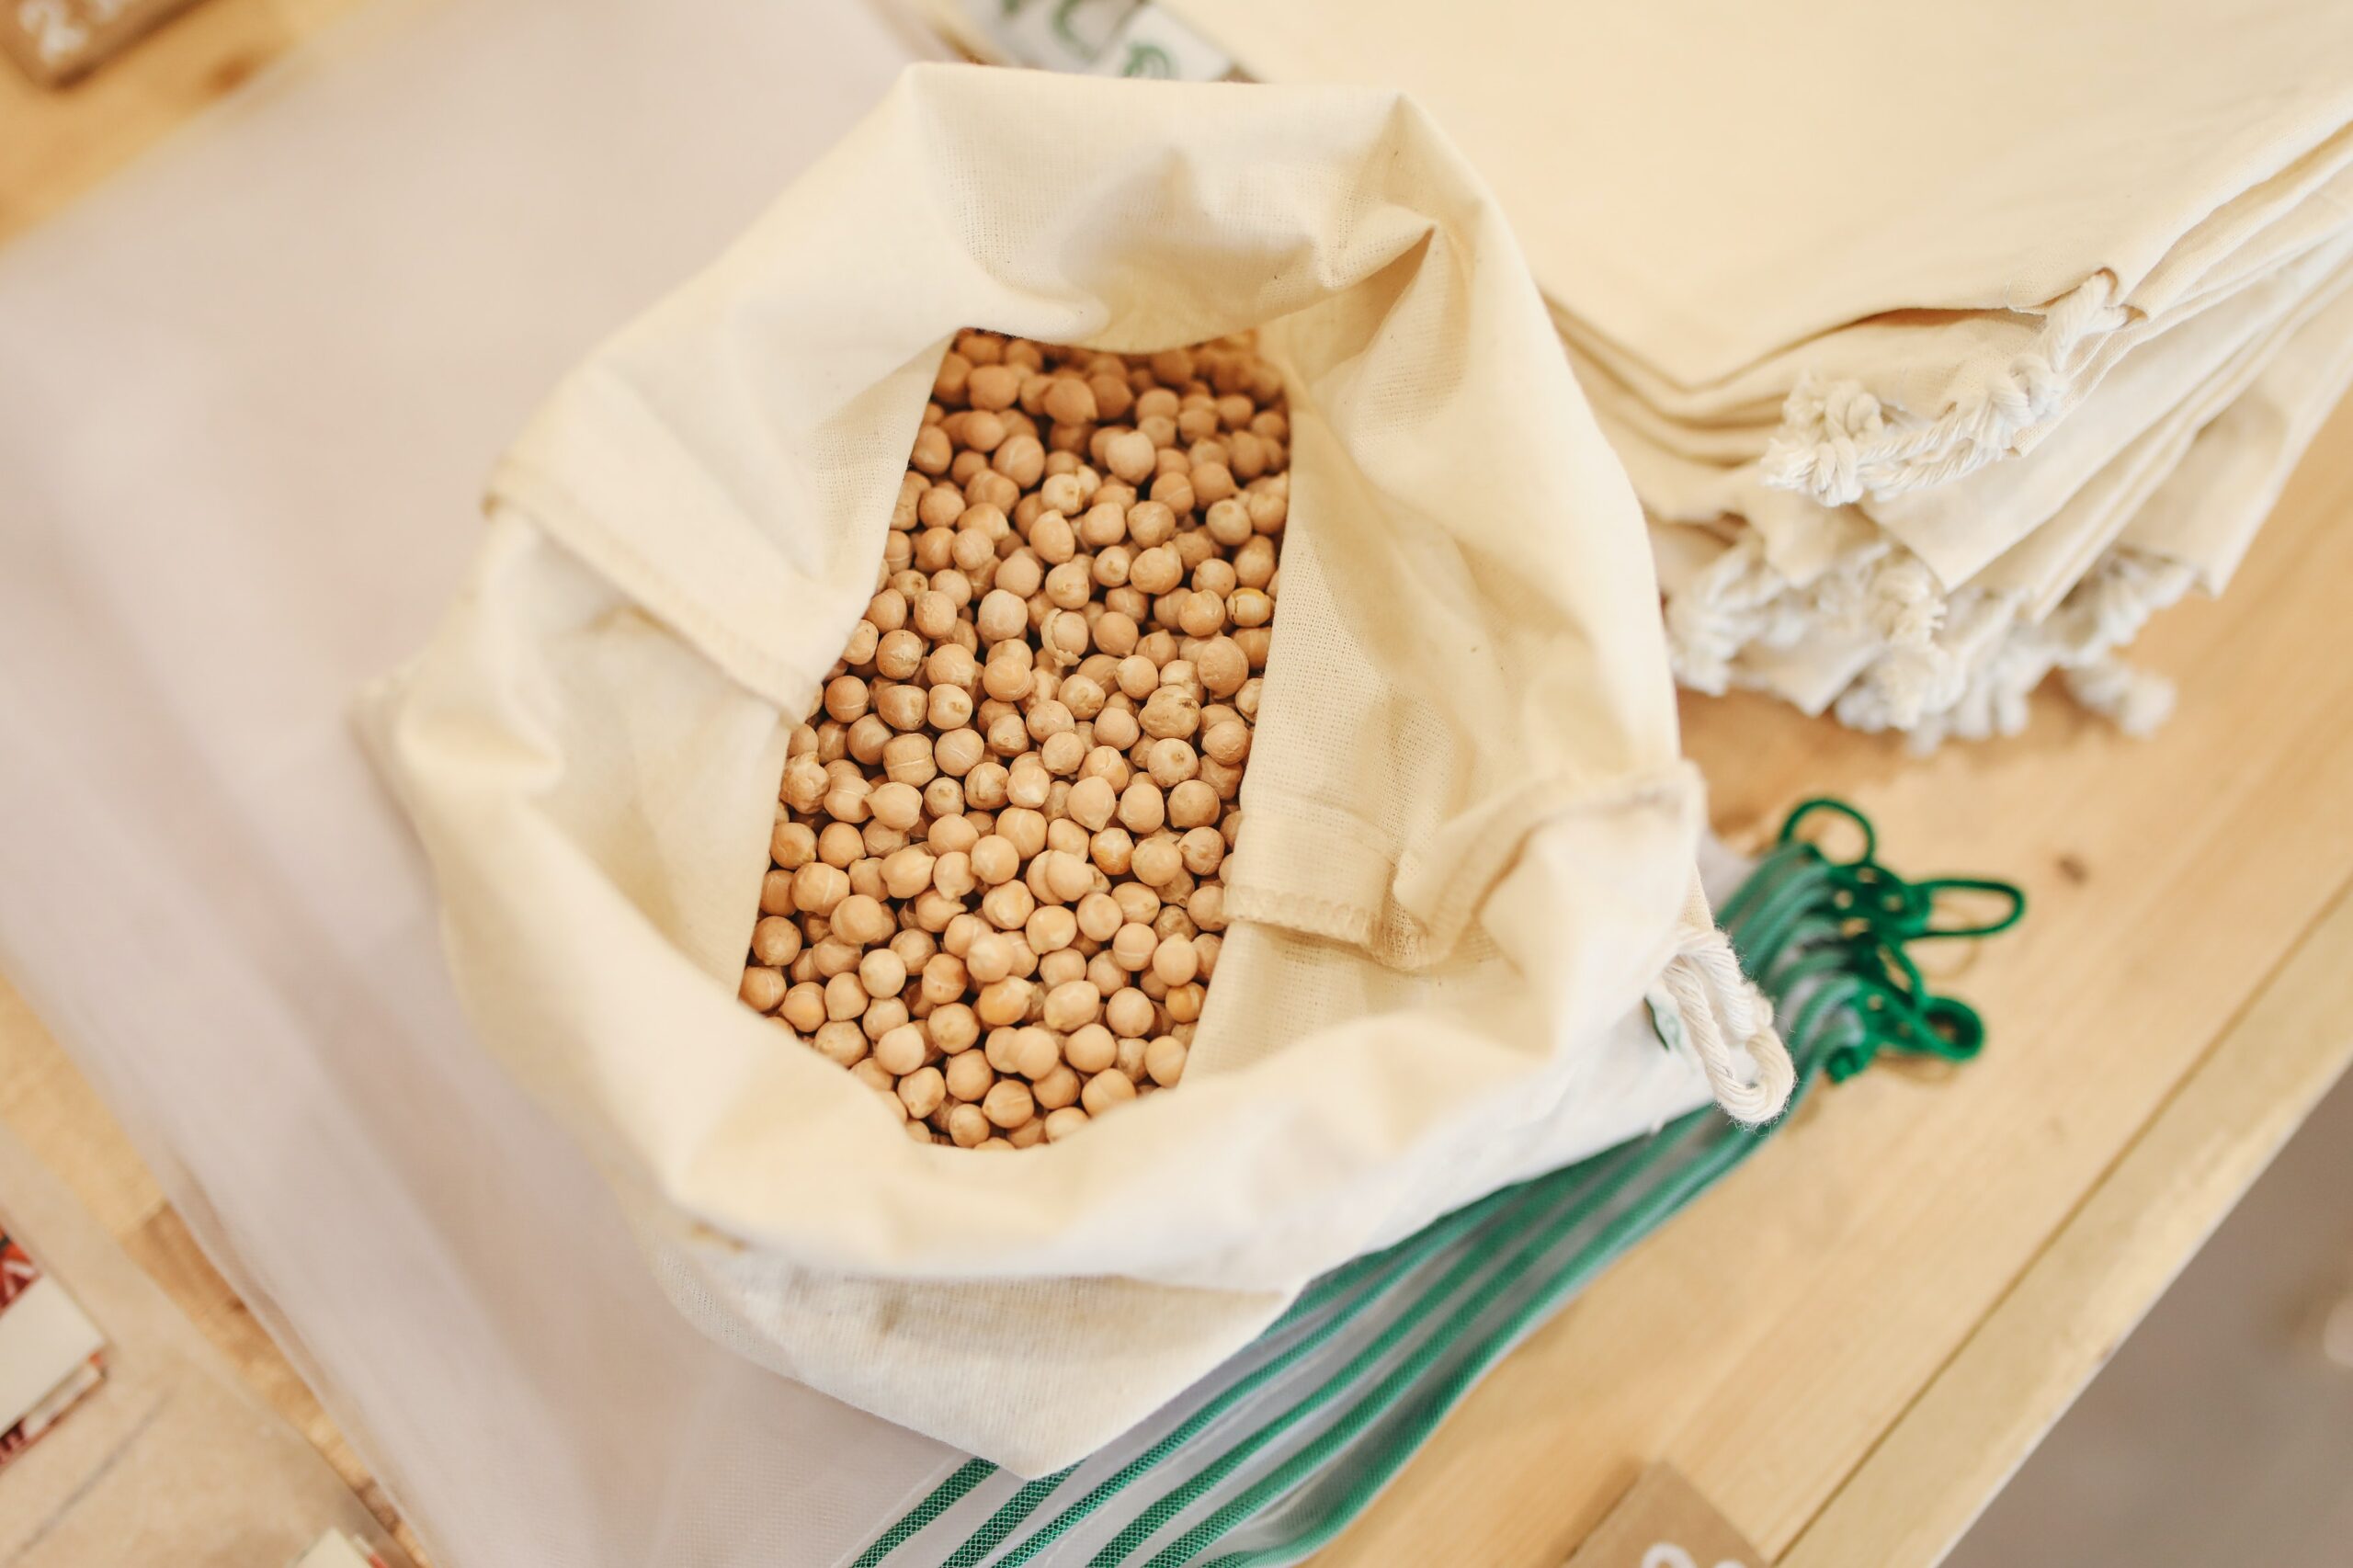 Soy beans, which arrived in Europe almost a century after soy sauce